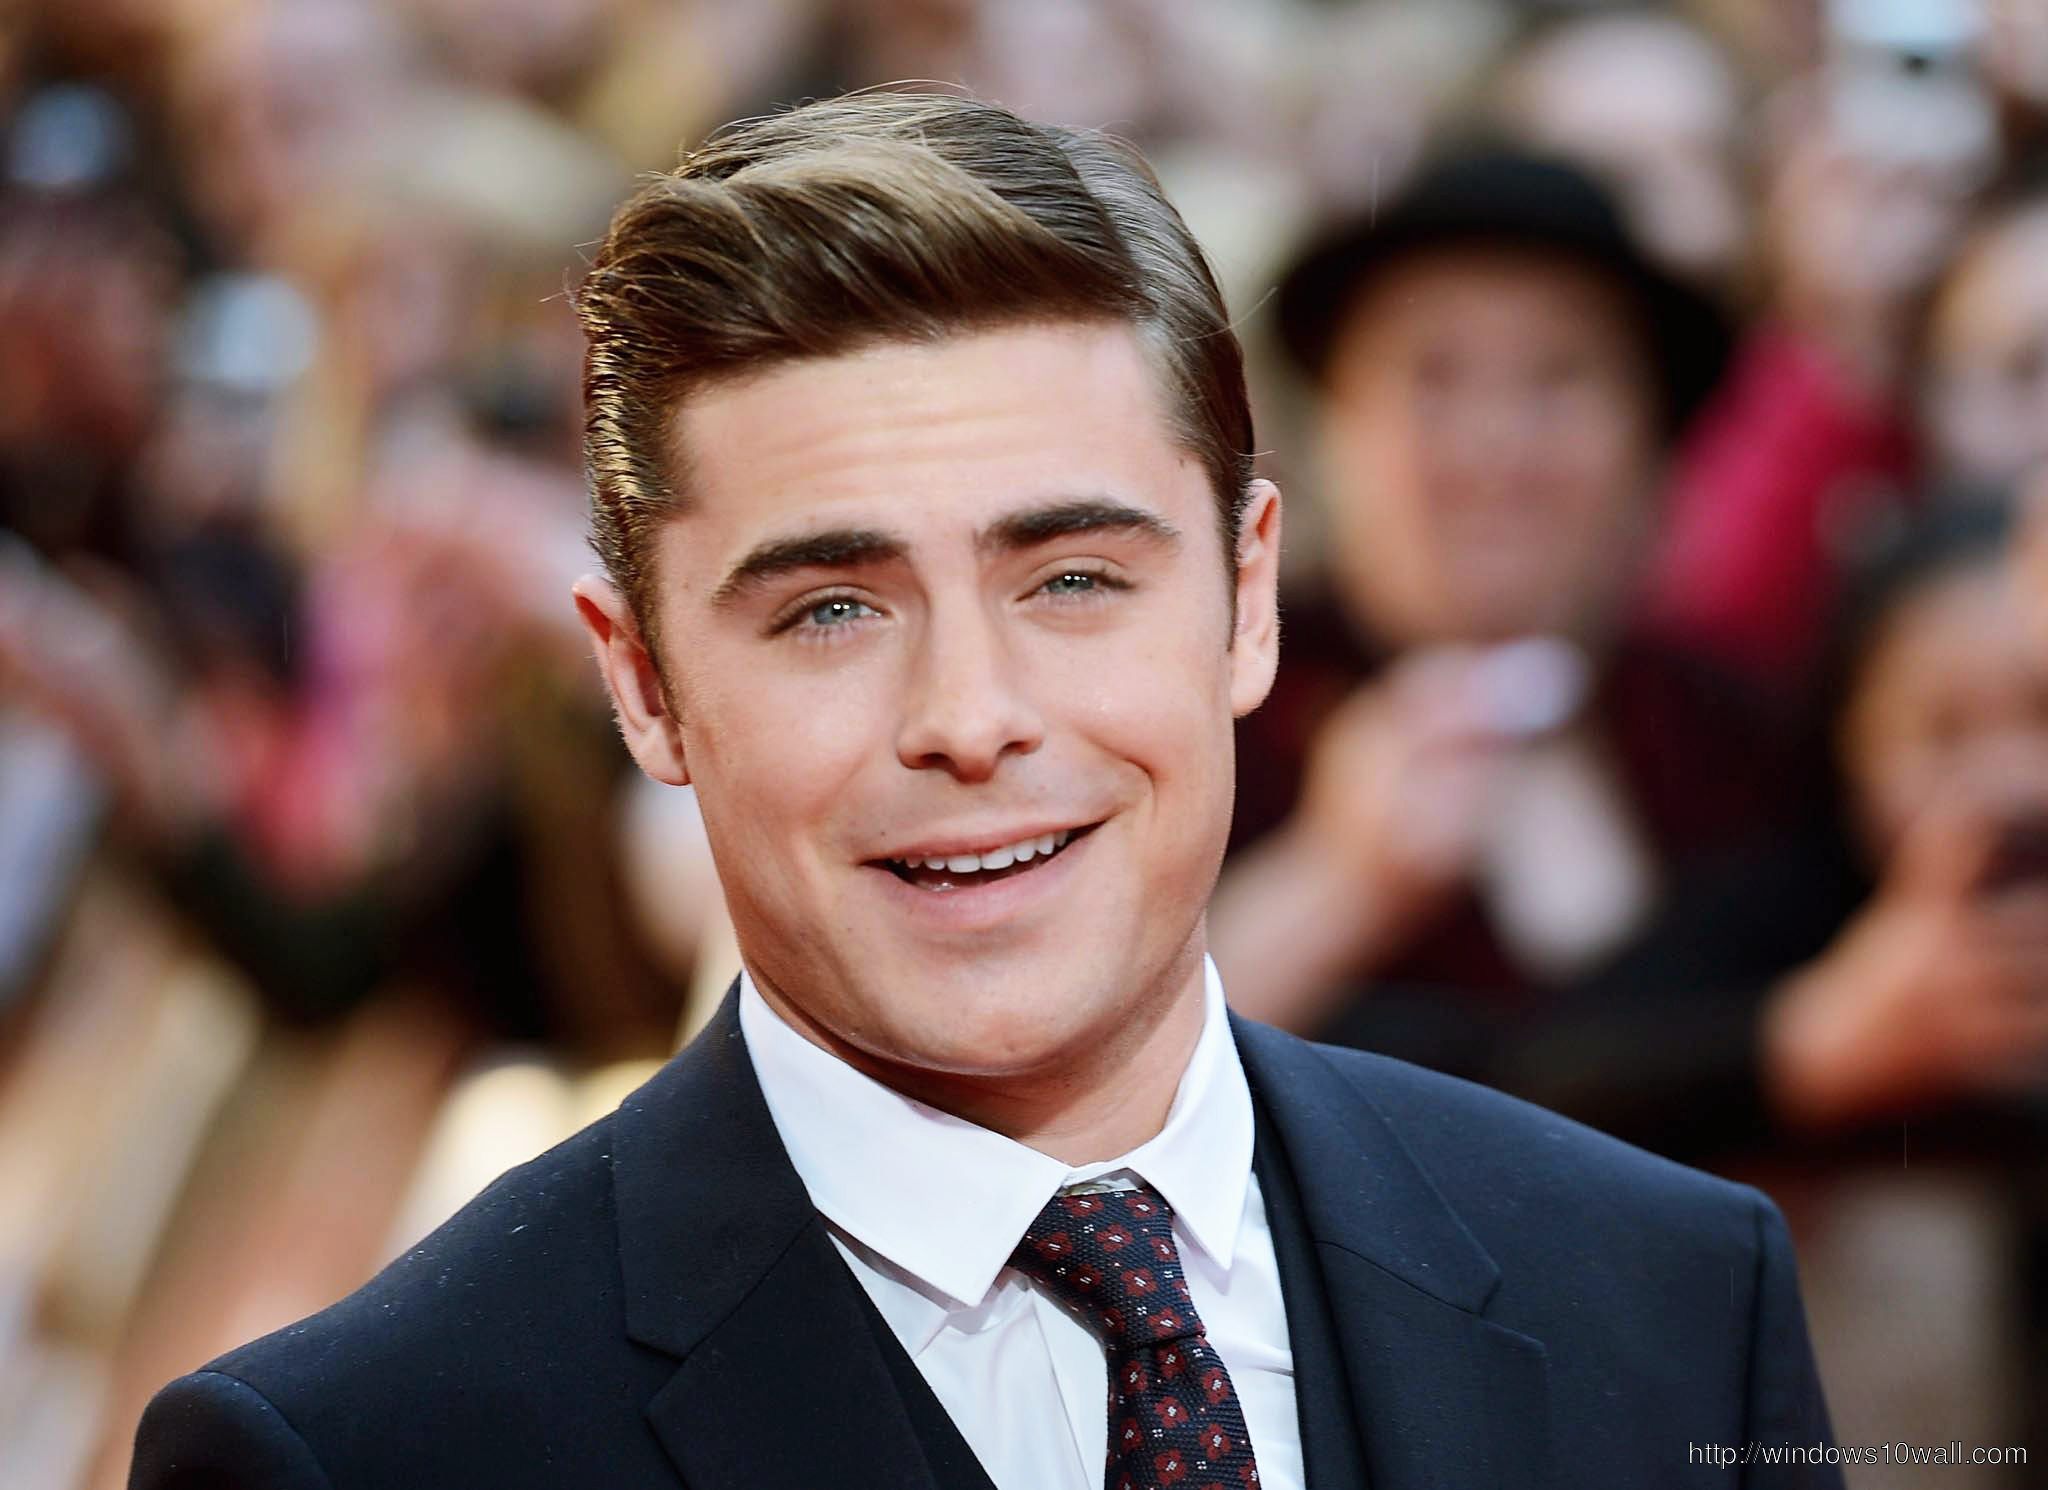 zac-efron-hair-style-2014-background-wallpaper